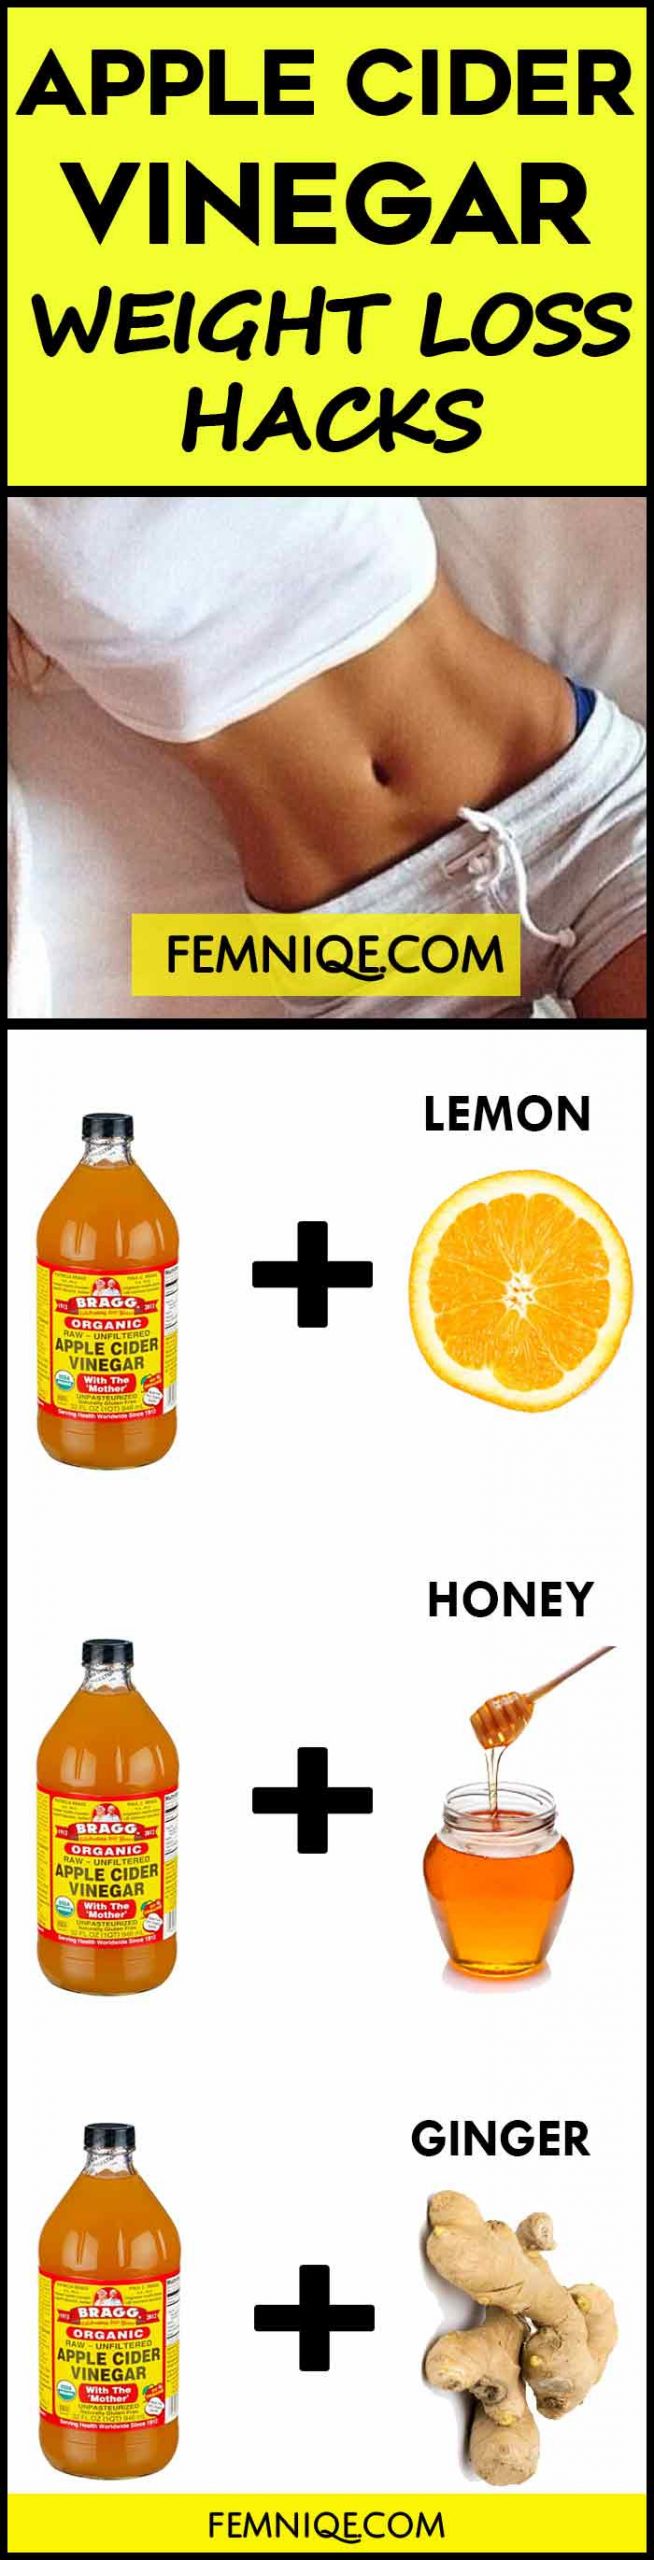 Best Time To Drink Apple Cider Vinegar
 How To Use Apple Cider Vinegar for Weight Loss Femniqe